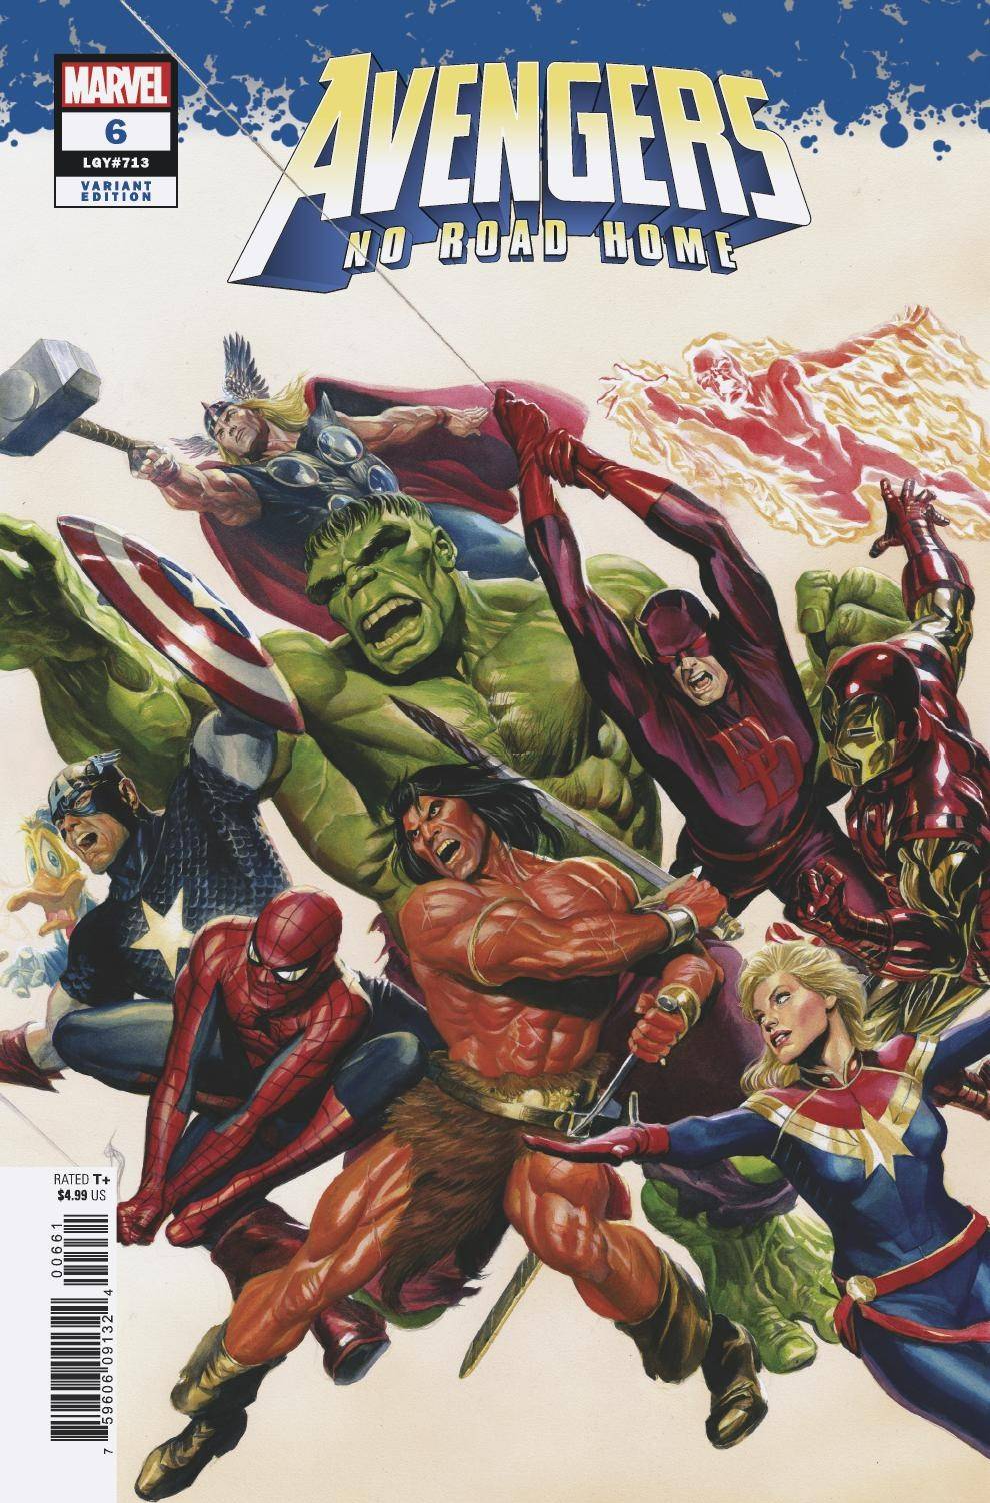 AVENGERS NO ROAD HOME #6 (OF 10) ALEX ROSS 1:100 VARIANT 2019